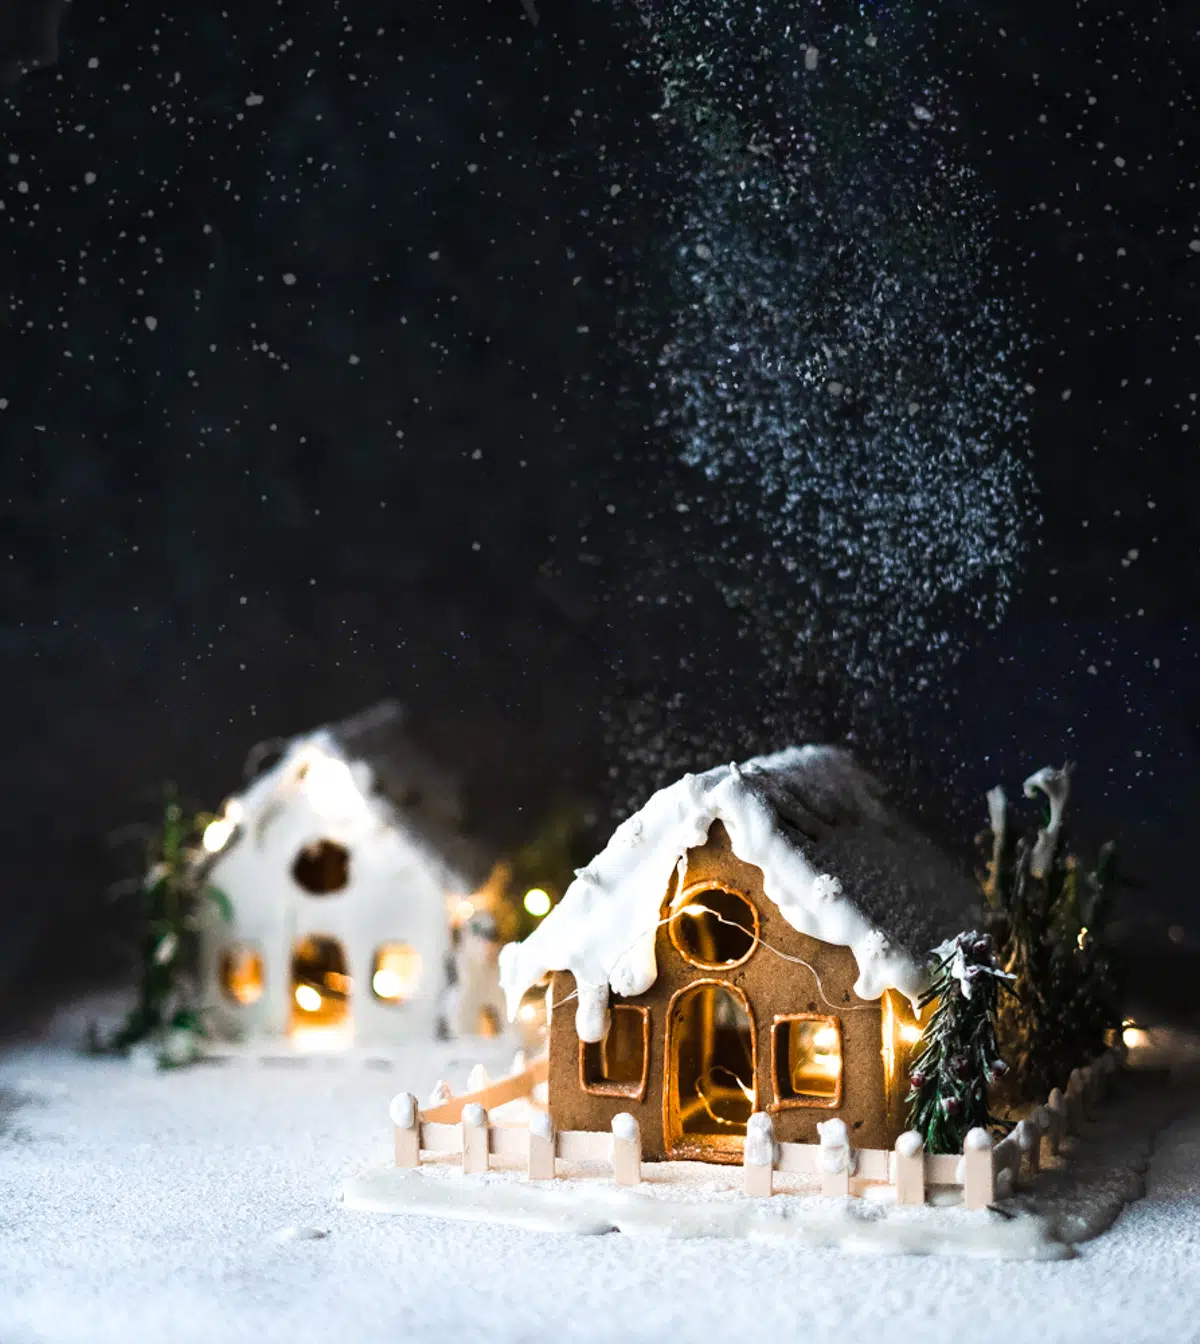 2 gingerbread houses with snow and dark background.